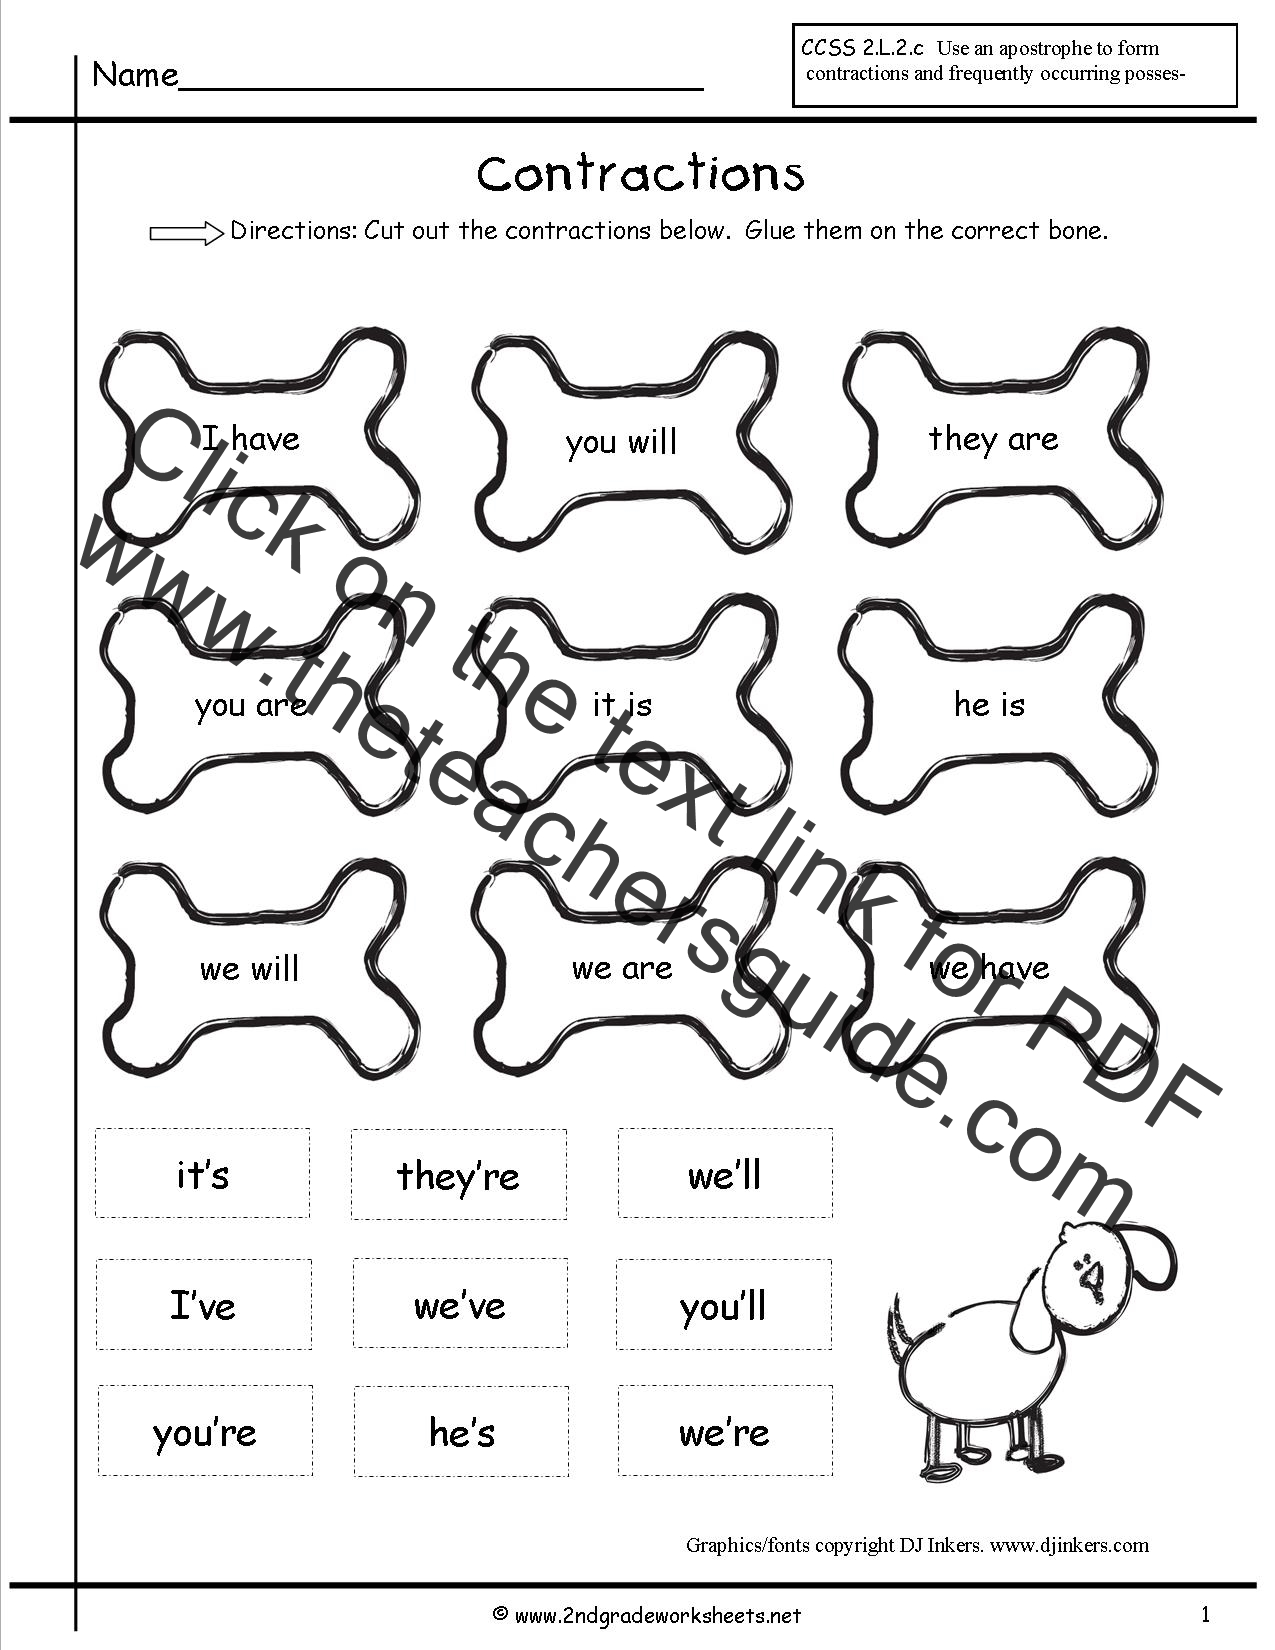 Free Contractions Worksheets and Printouts Regarding Contractions Worksheet 2nd Grade